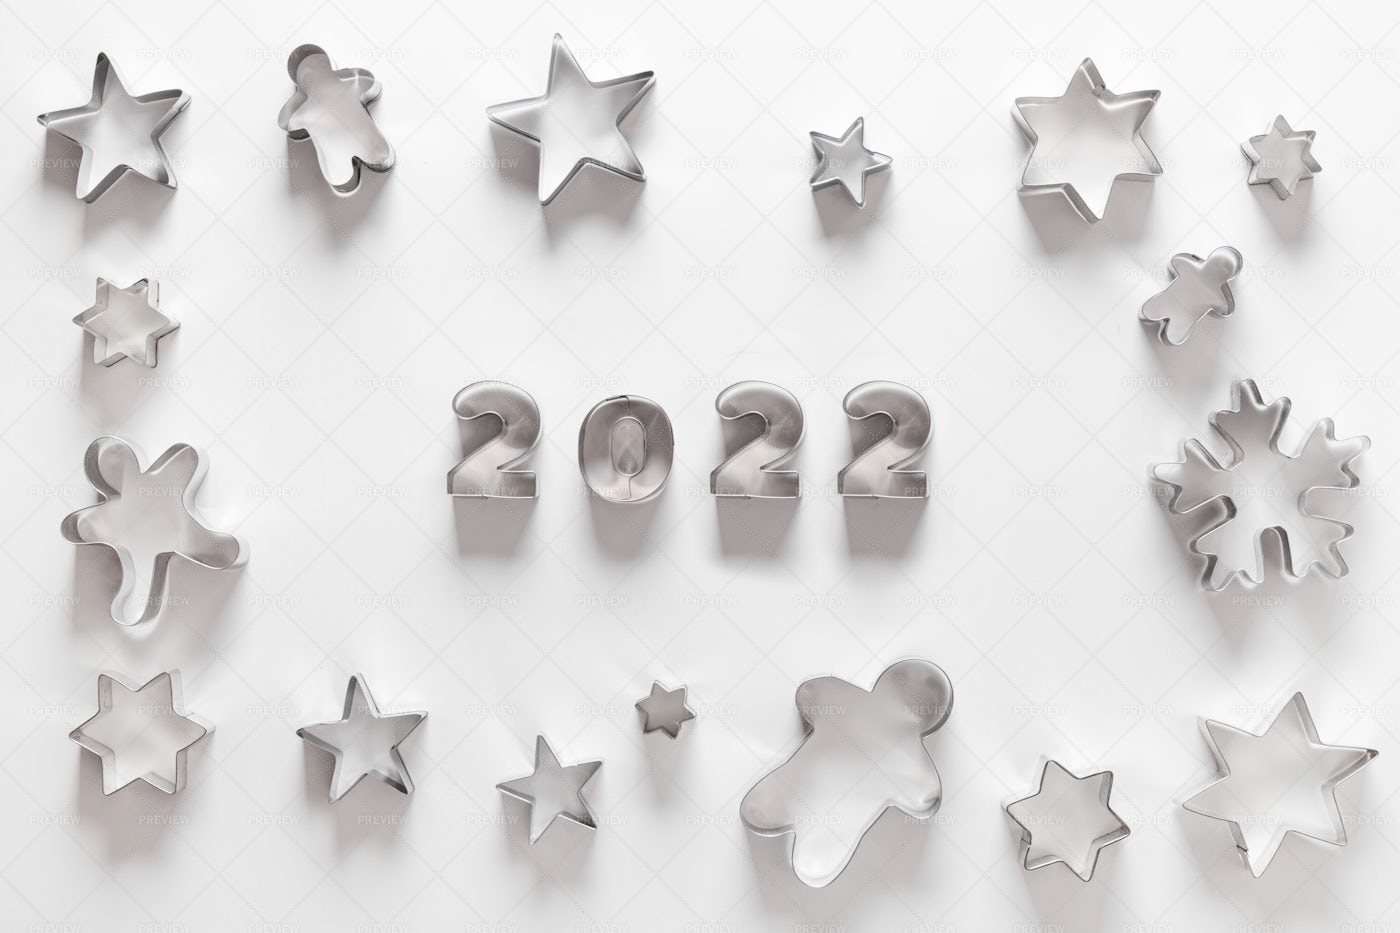 Christmas-themed Cookie Cutters: Stock Photos